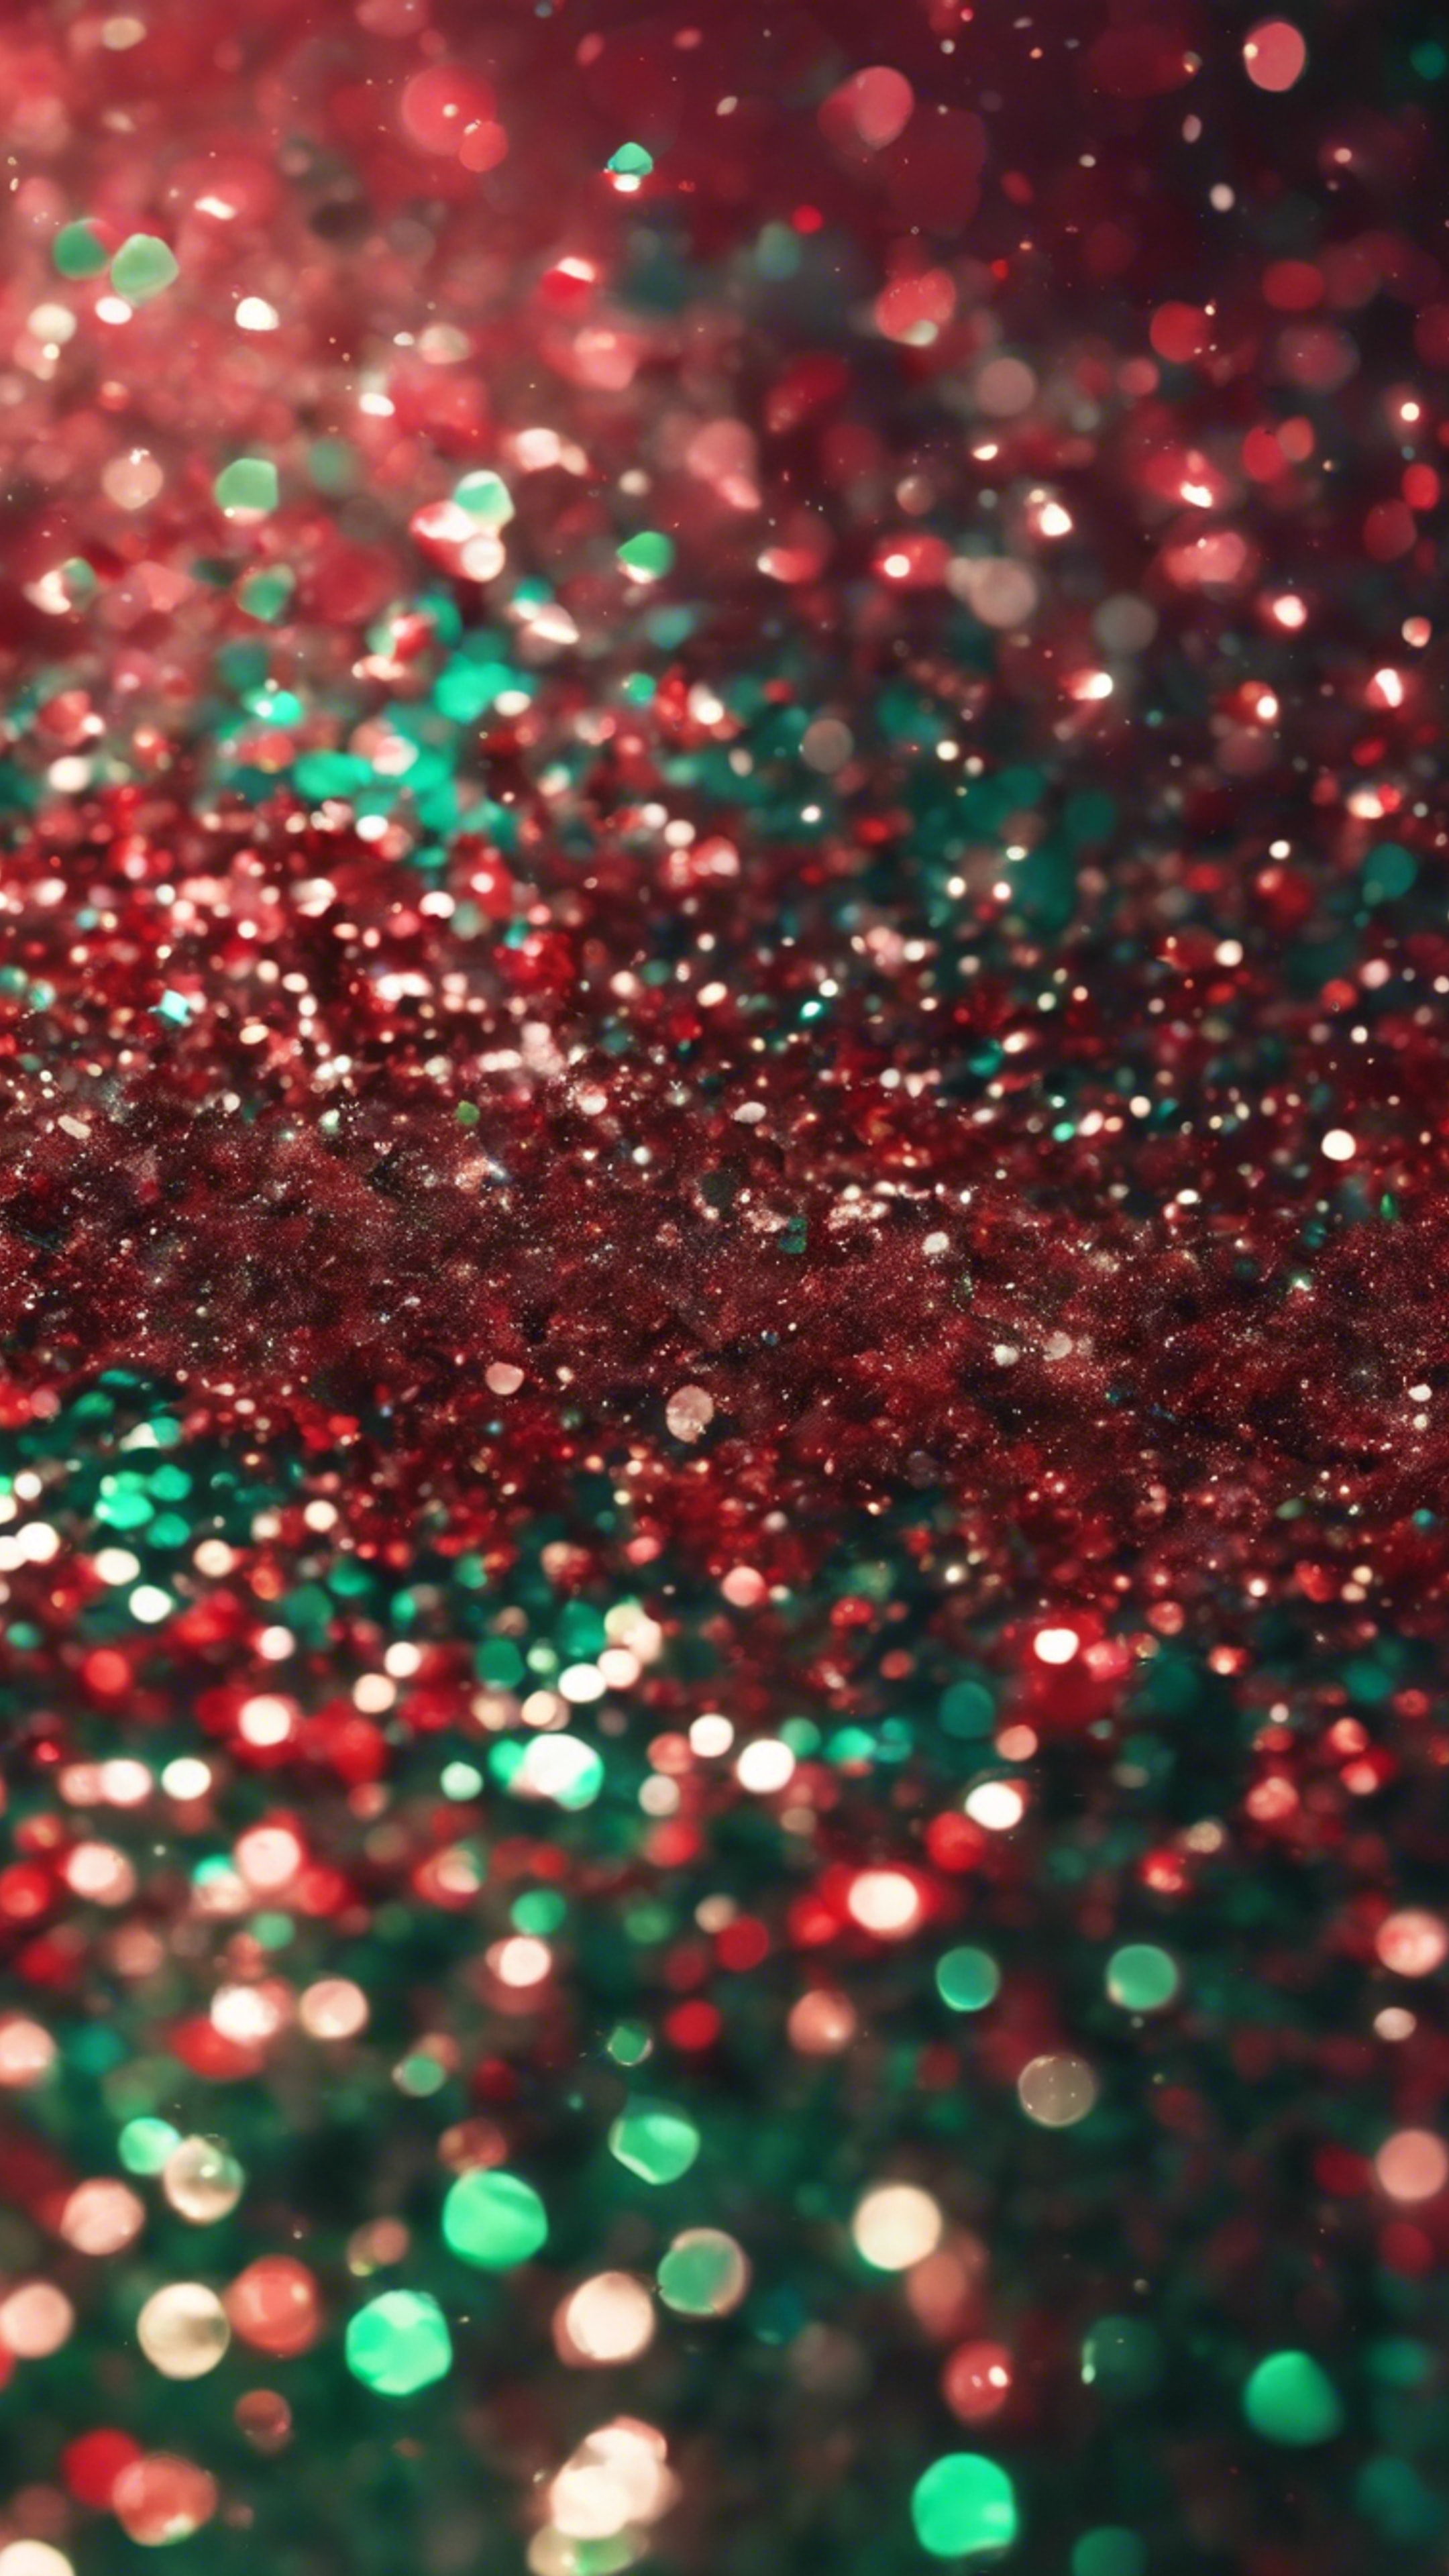 A mix of large and small particles of red and green glitter Tapeta[305fad2da0d041f9bf26]